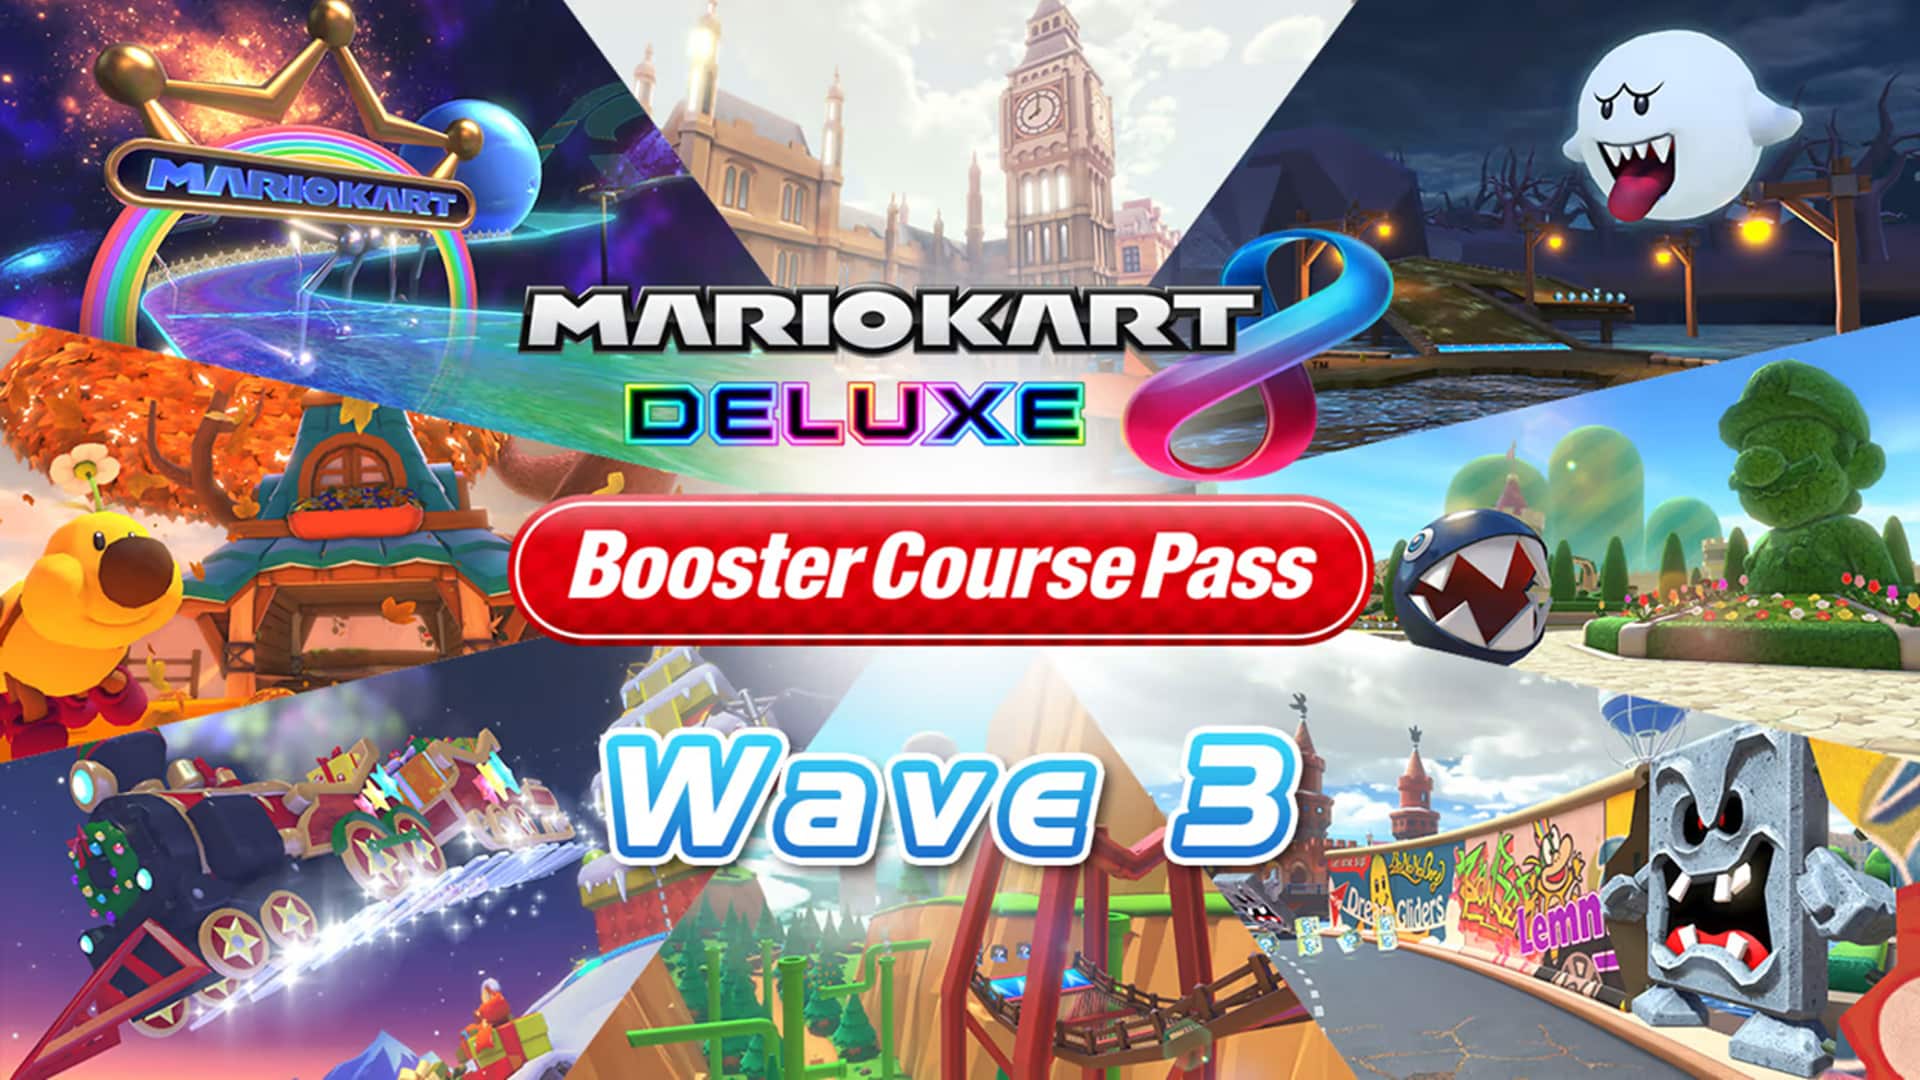 Mario Kart 8 Deluxe - Booster Course Pass Wave 3 Tracks Shortcuts Locations Guide